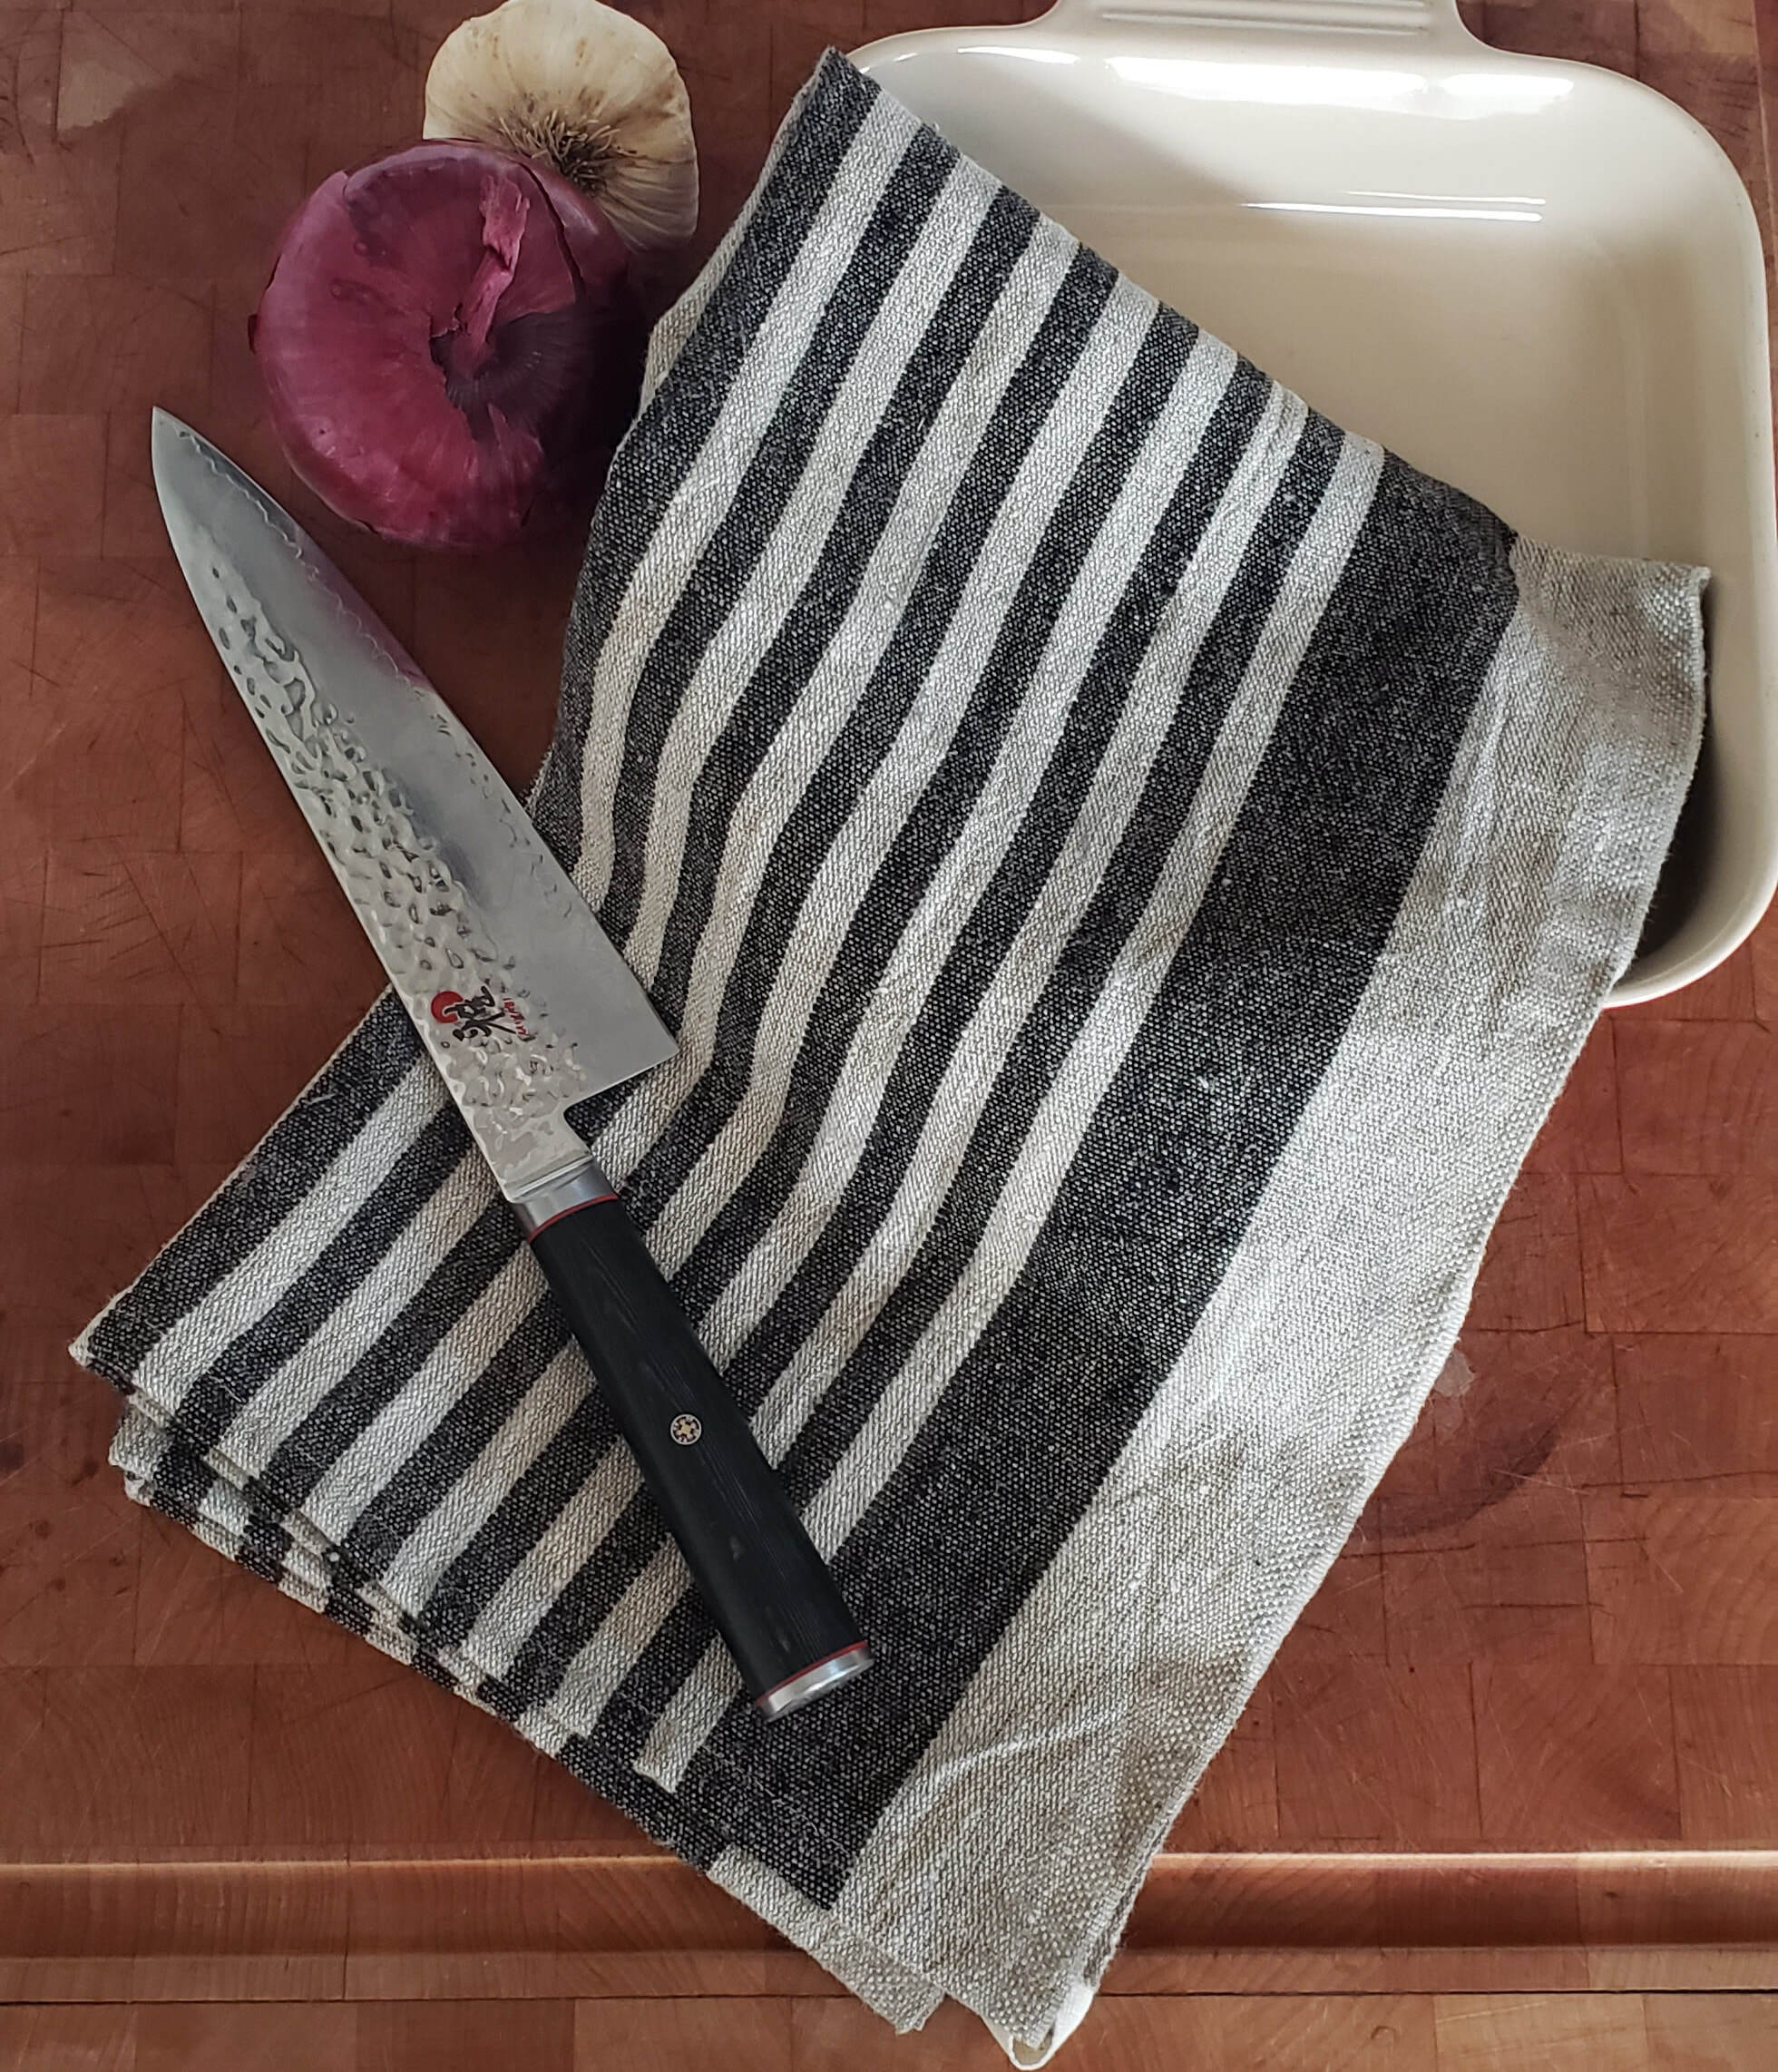 Shop for Handmade Rustic linen dish towels at the Burncoat Center for Arts  and Wellness.